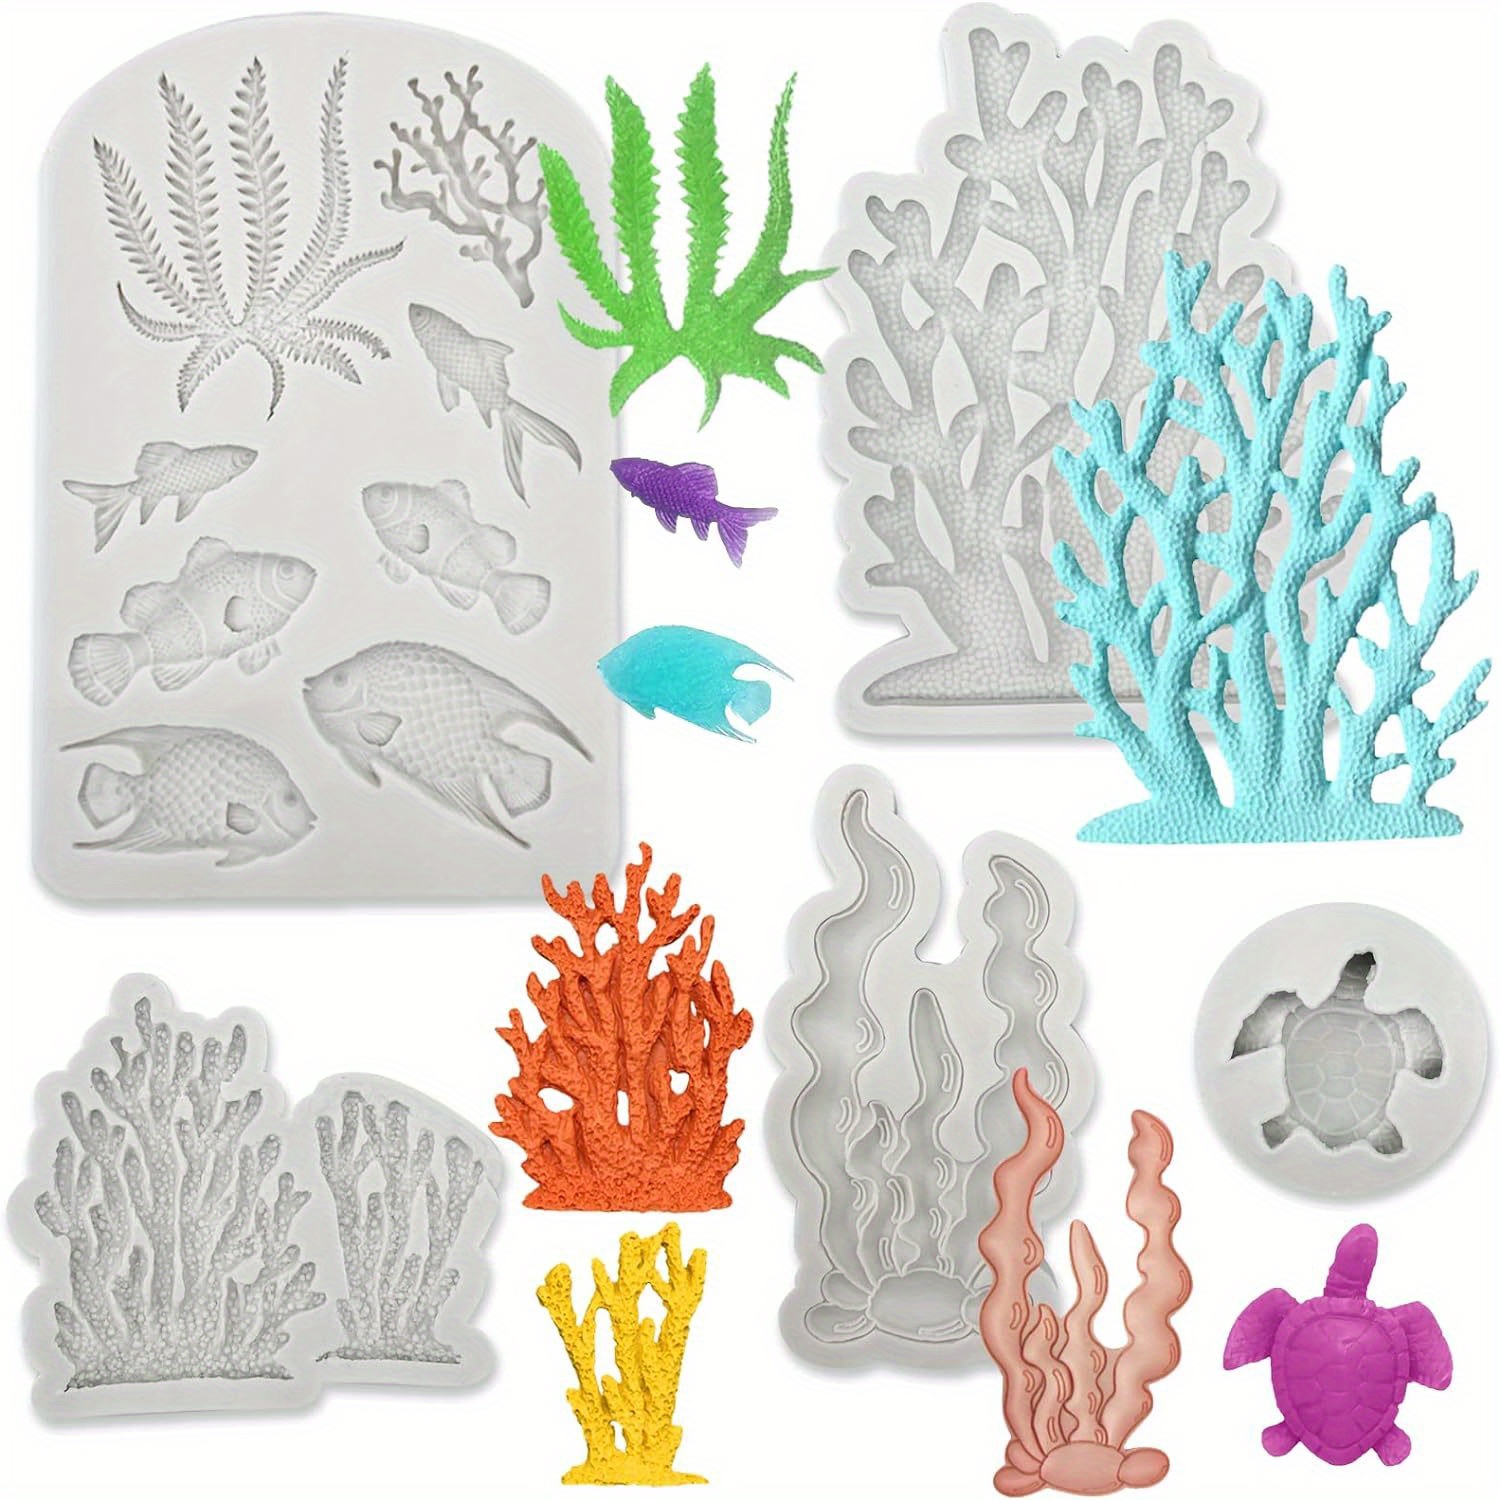 

5pcs, Ocean Fish Coral Fondant Molds, 3d Silicone Mold Set, Candy Mold, Chocolate Mold, For Diy Cake Decorating Tool, Baking Tools, Kitchen Accessories